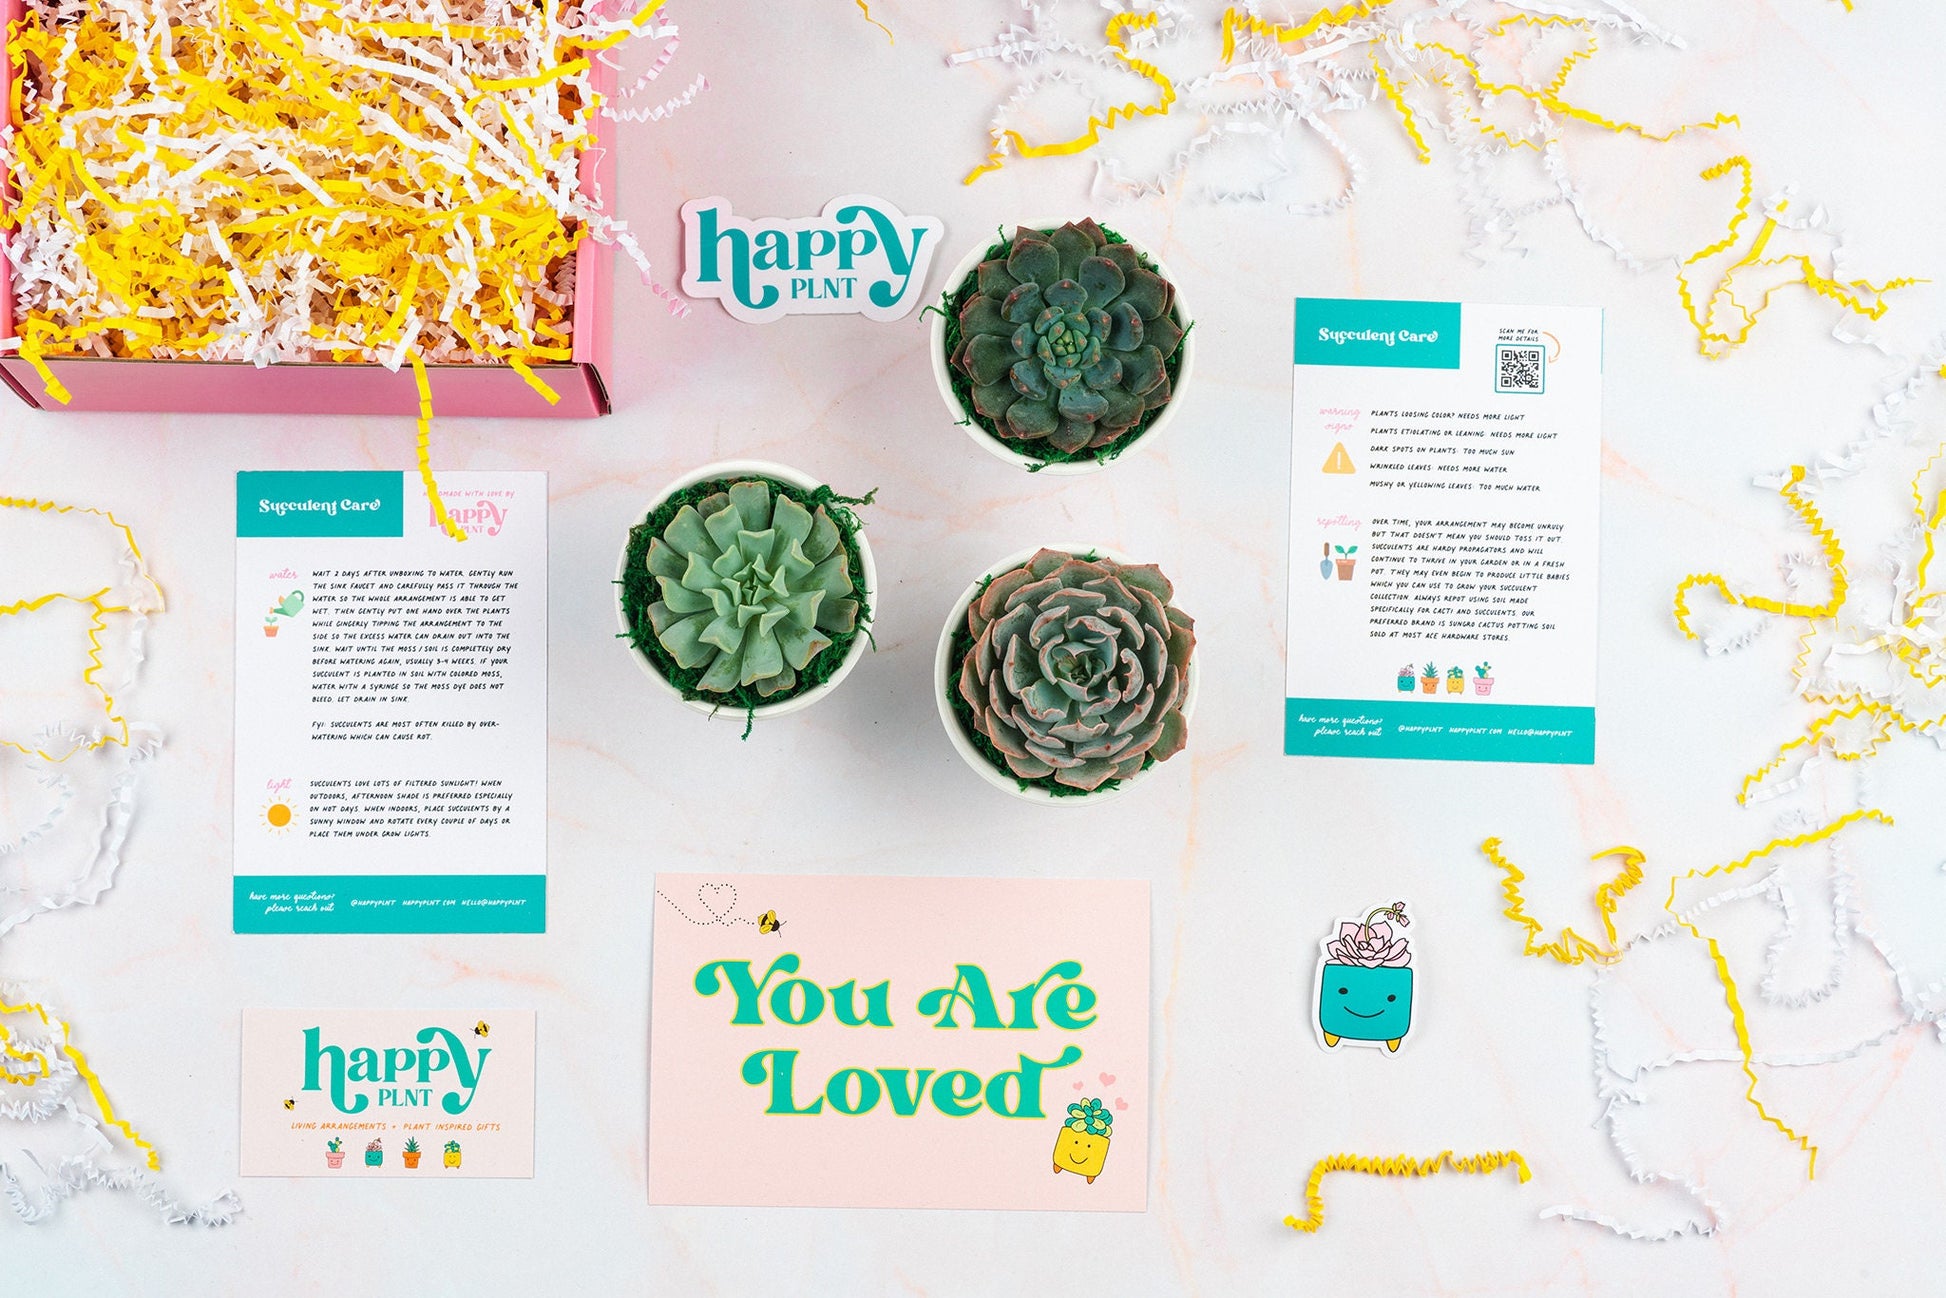 Baby Shower, Mom to Be, New Baby Succulent Gift Box | 3 Living Succulent Pots + Personalized Greeting Card, Gender Neutral Baby Gift